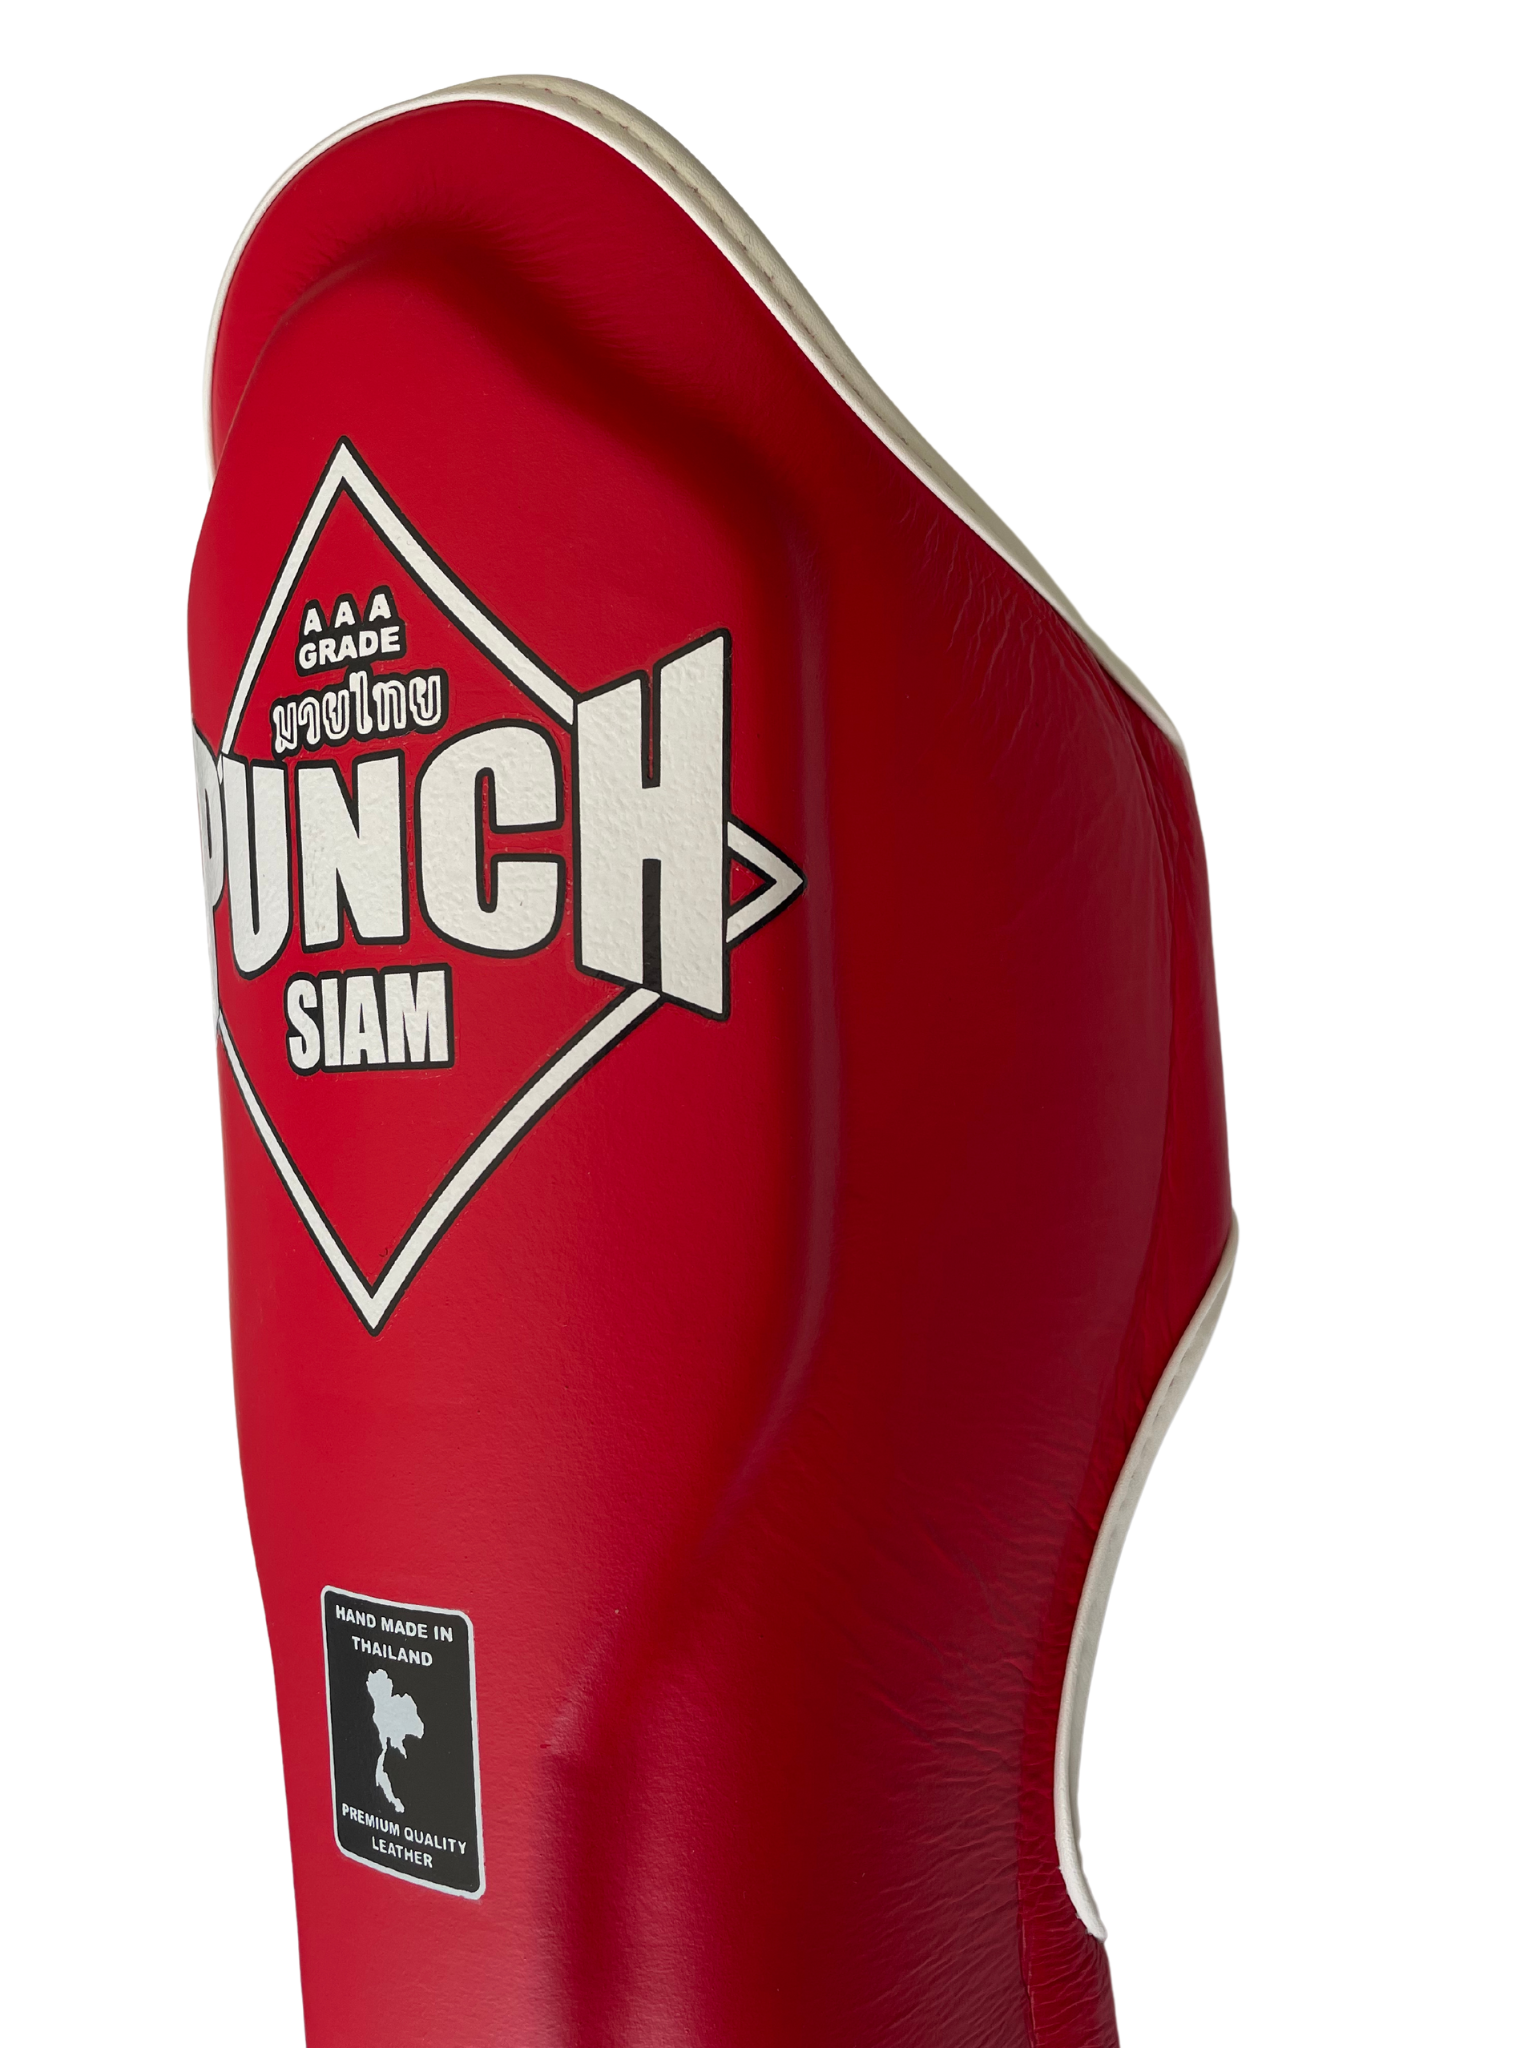 SHIN PADS - Siam™ - LEATHER - RED